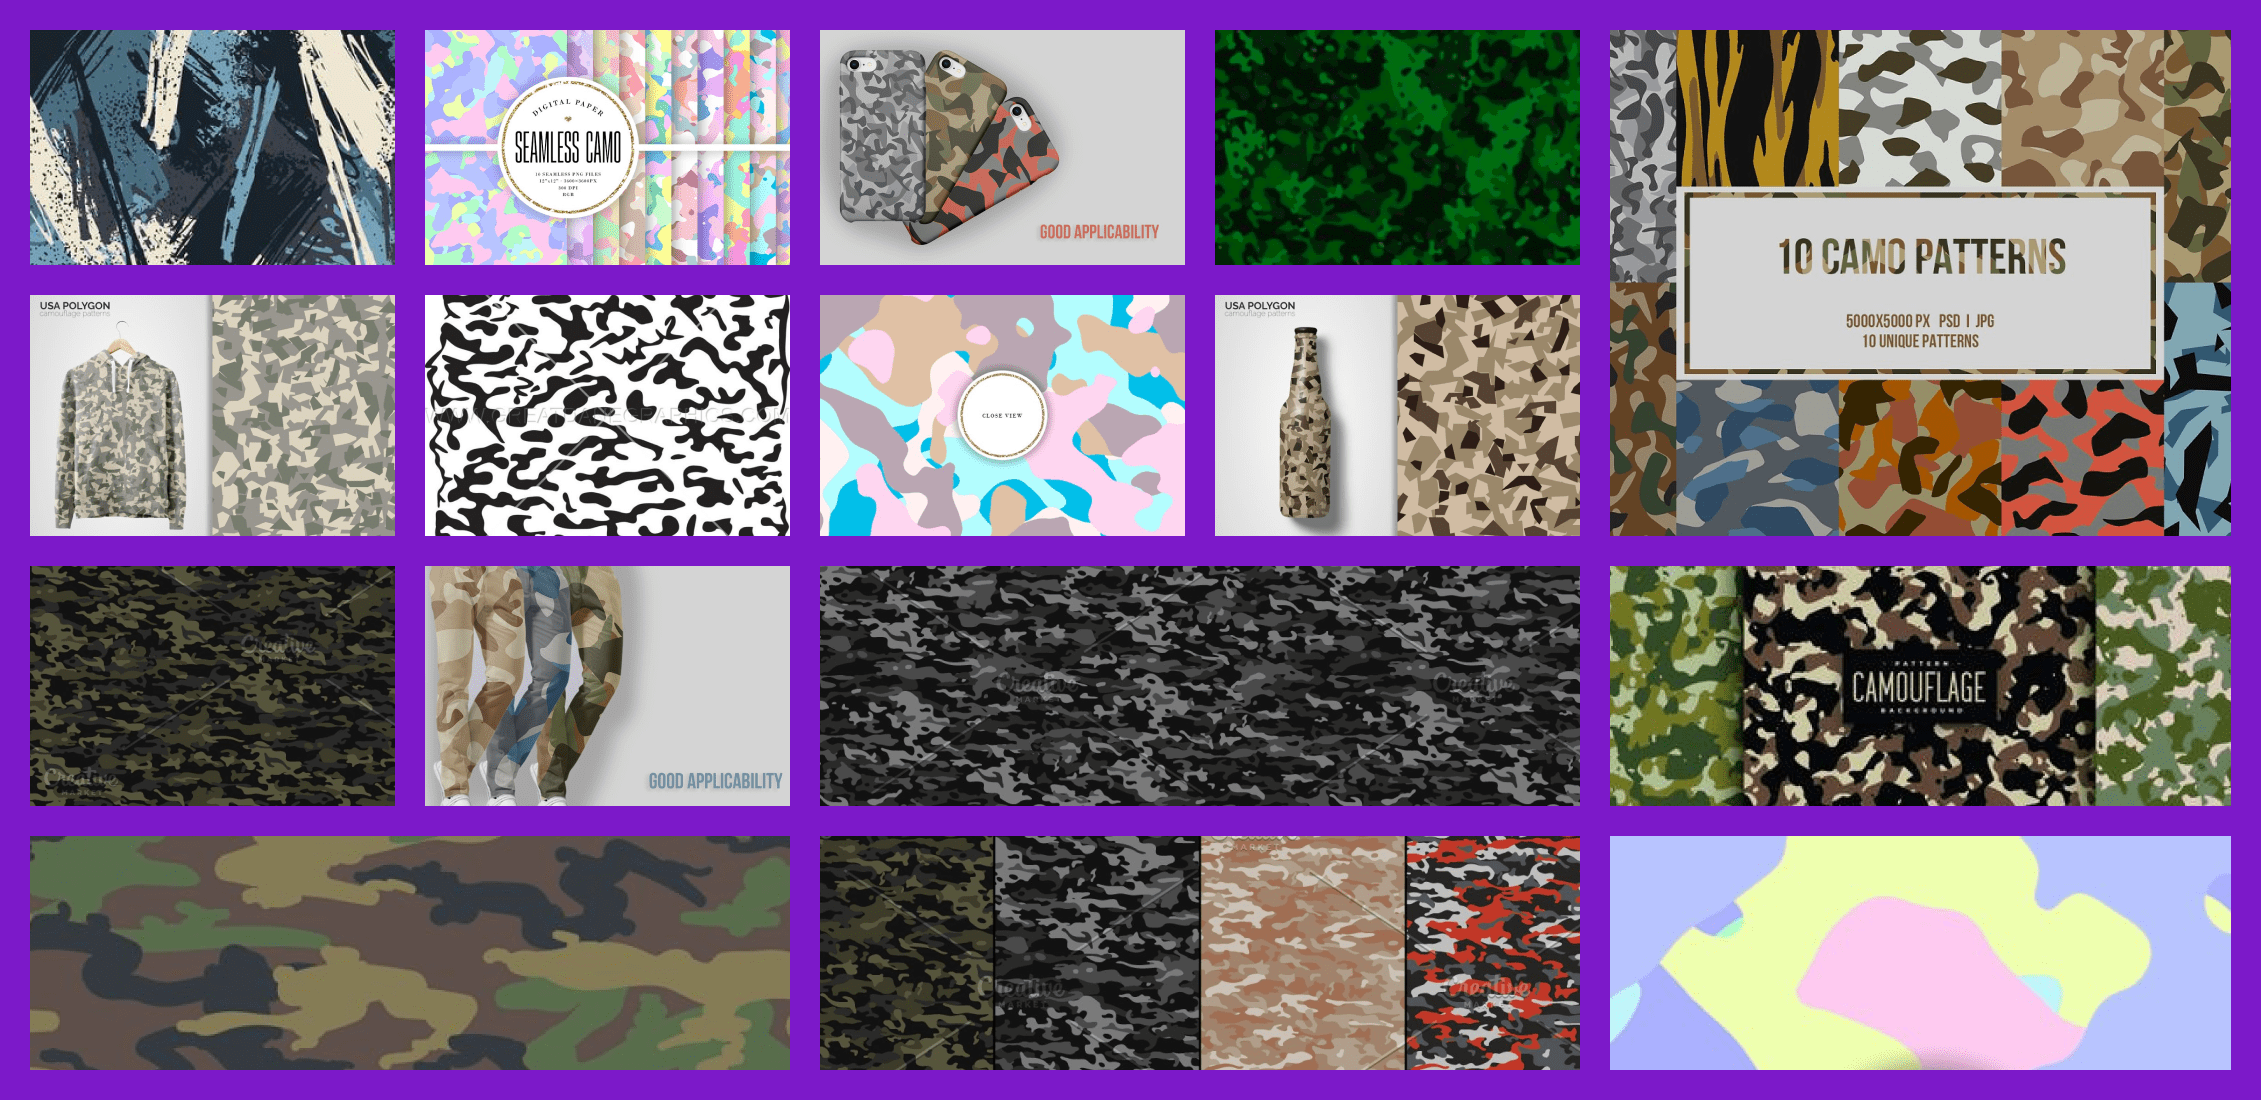 Best 15 Camo Patterns in 2021 Free and Premium Example.